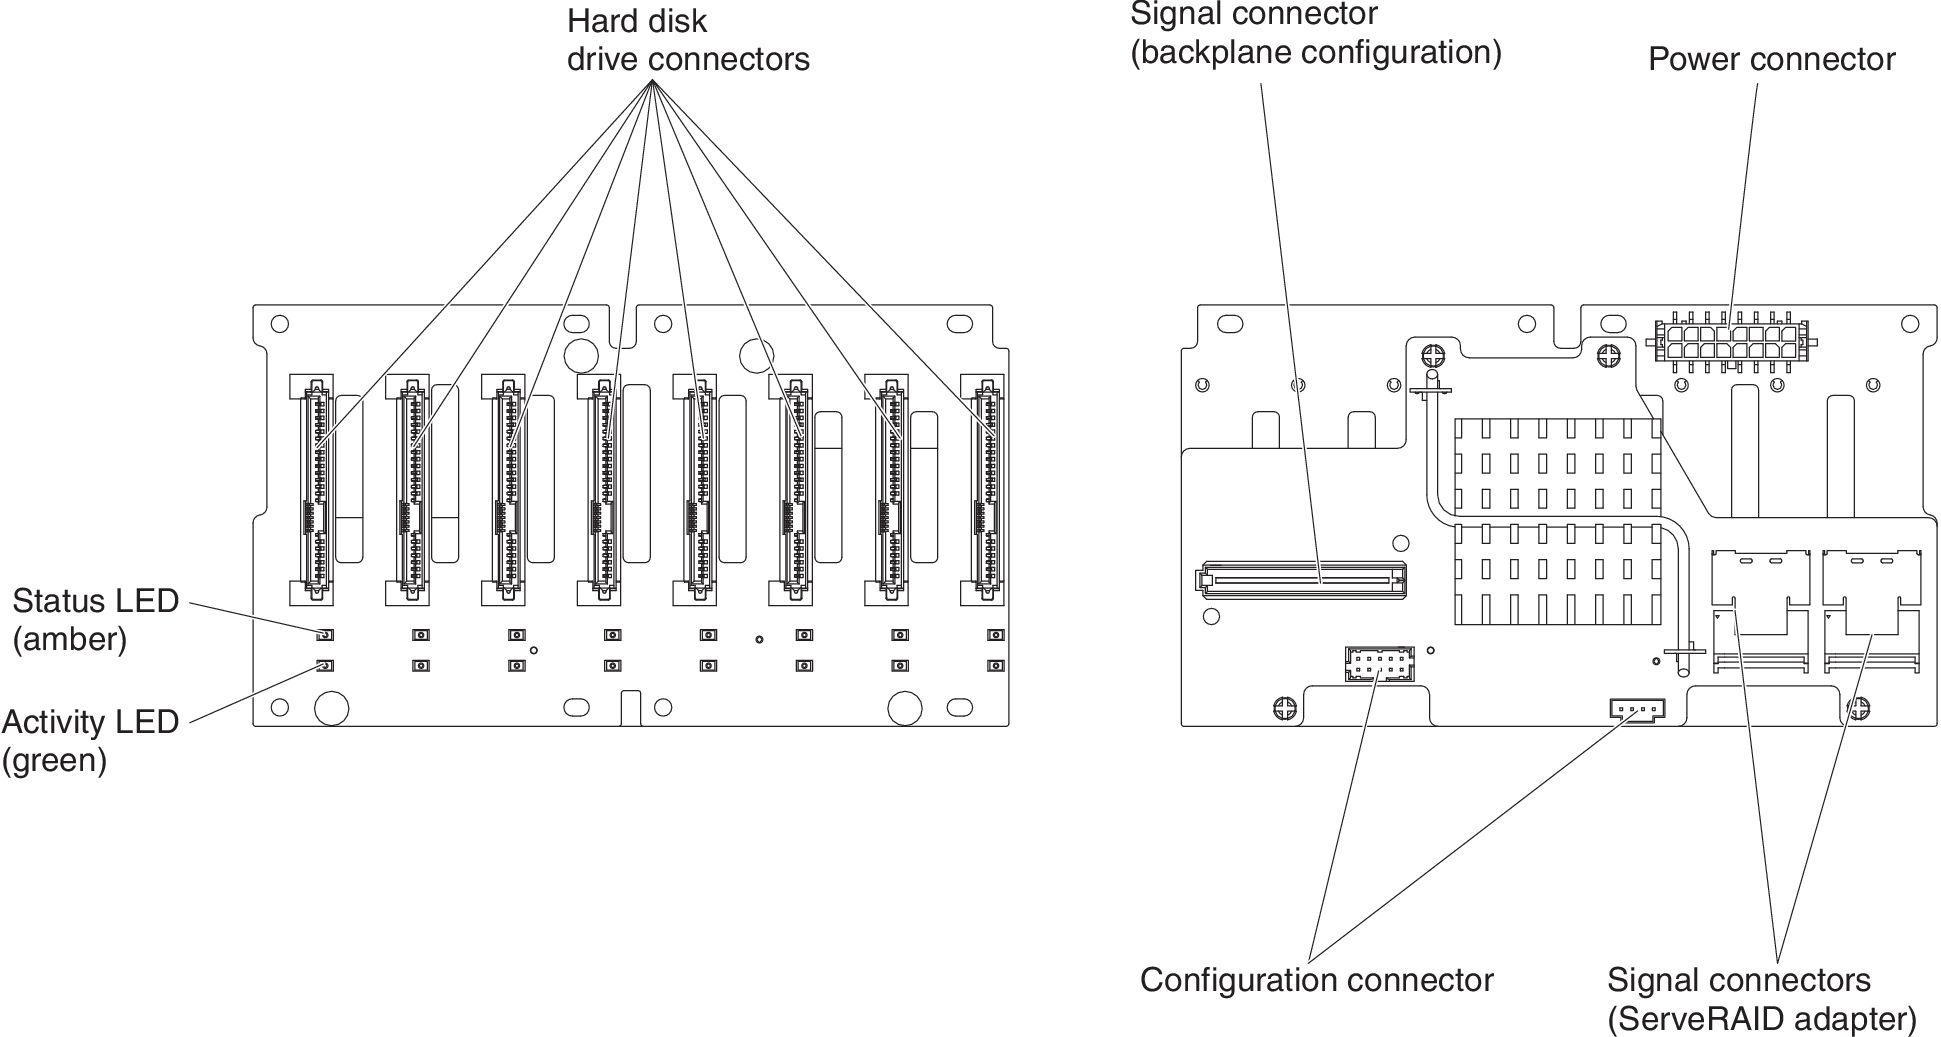 Connectors on the 2.5-inch hard disk drive backplane with the expander